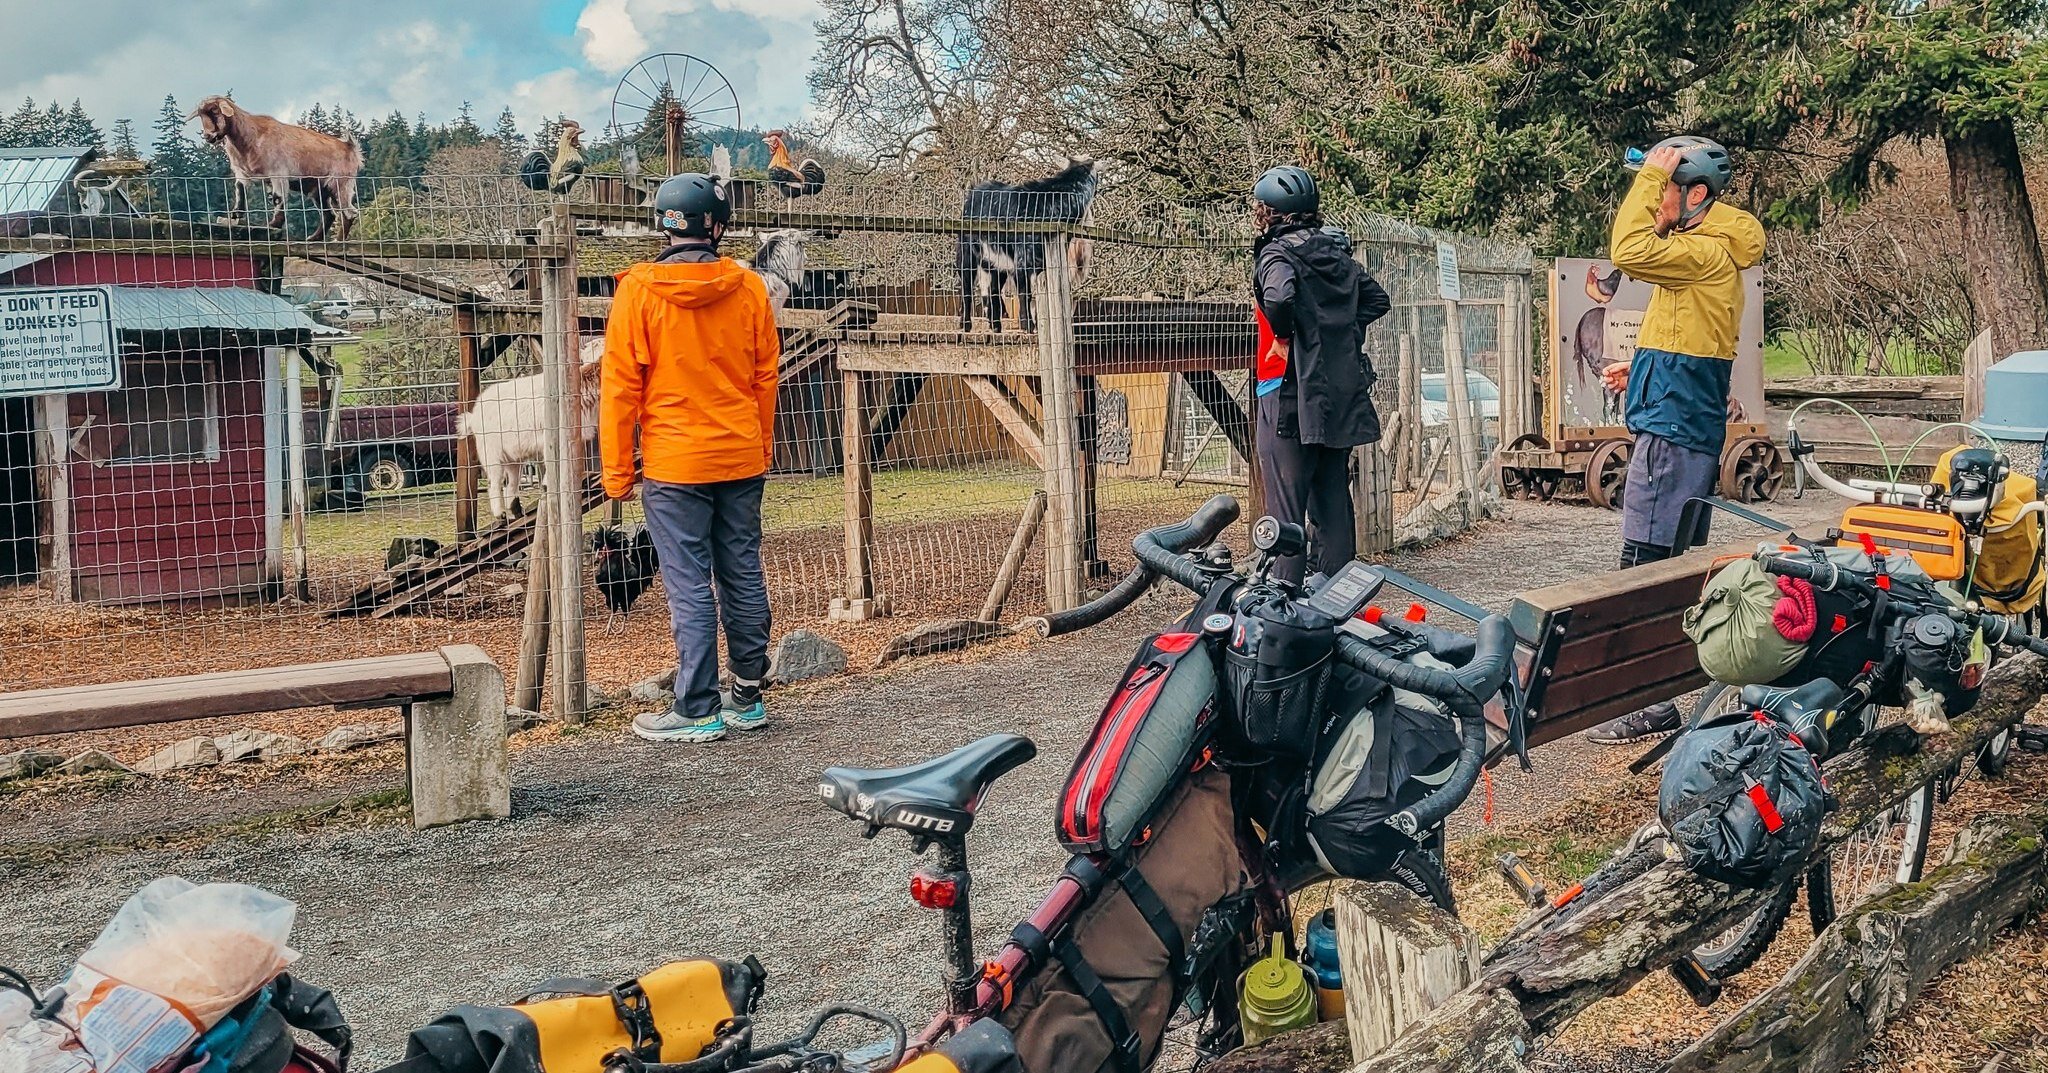 We've had some great times on the Sooke Brewery Sampler tour this year. Lunches with ocean views, a great rail trail to ride along and friendly goats!
. 
#bikepacking #britishcolumbia #travel #nature #adventure #gravelbike #bicycletravel #rideyourbik